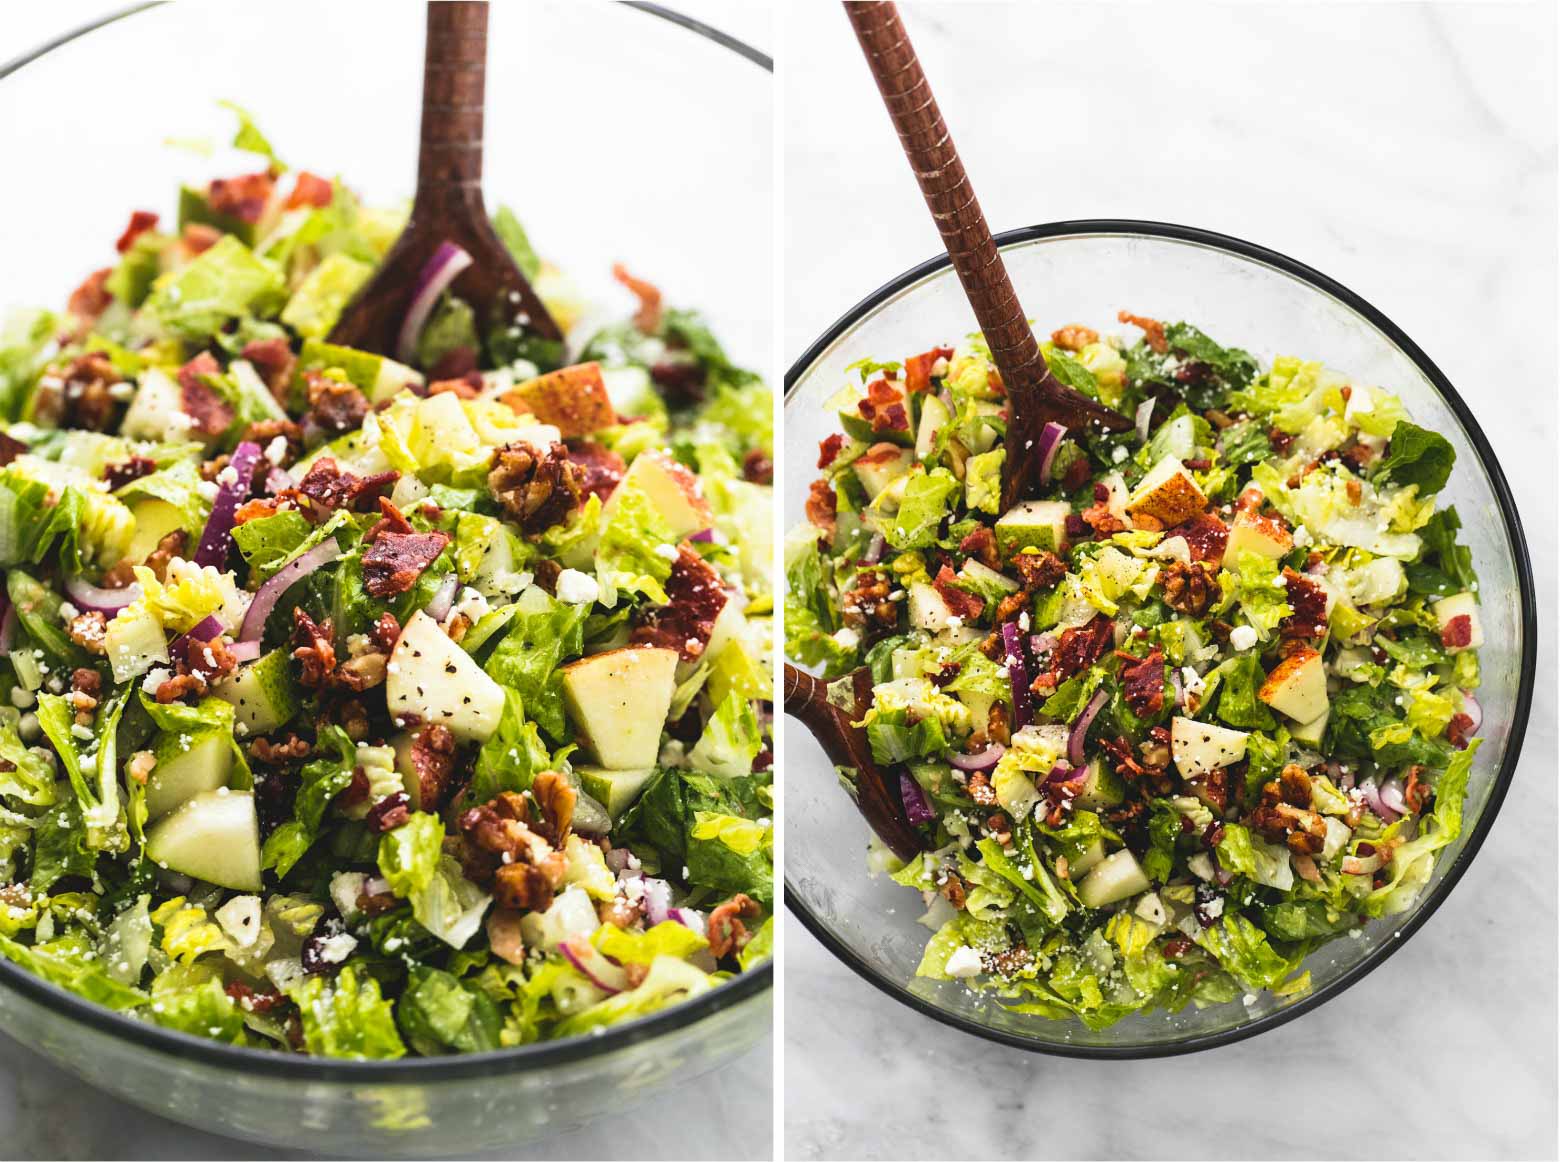 HEALTHY SALAD RECIPES FOR FALL-Chopped Autumn Salad With Apple Cider Dressing